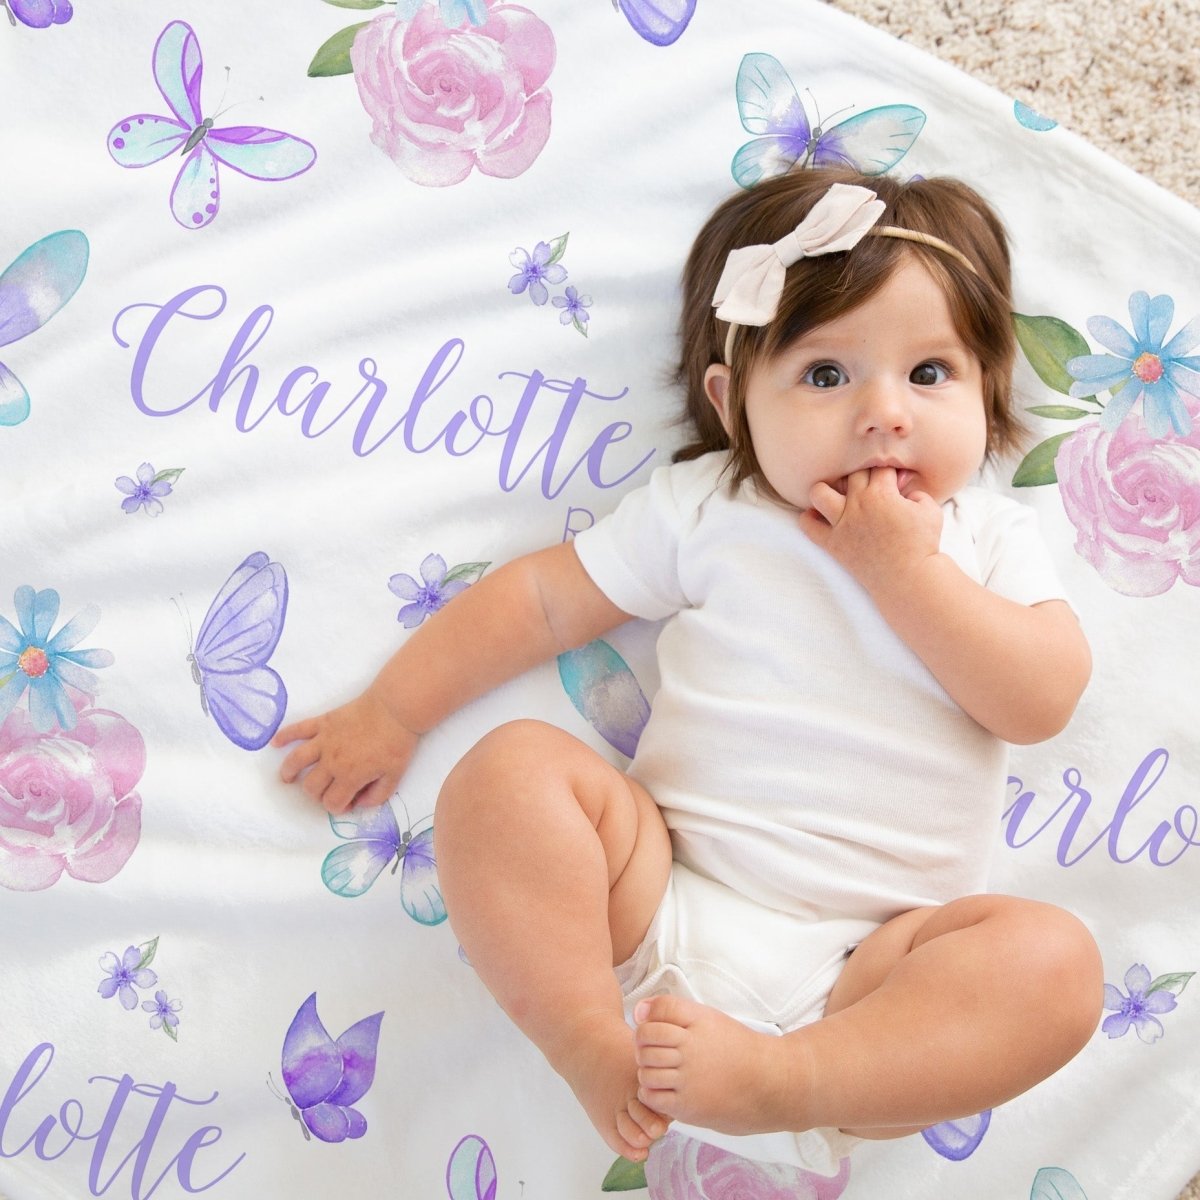 Butterfly Floral Personalized Baby Blanket - Butterfly Floral, gender_girl, Personalized_Yes